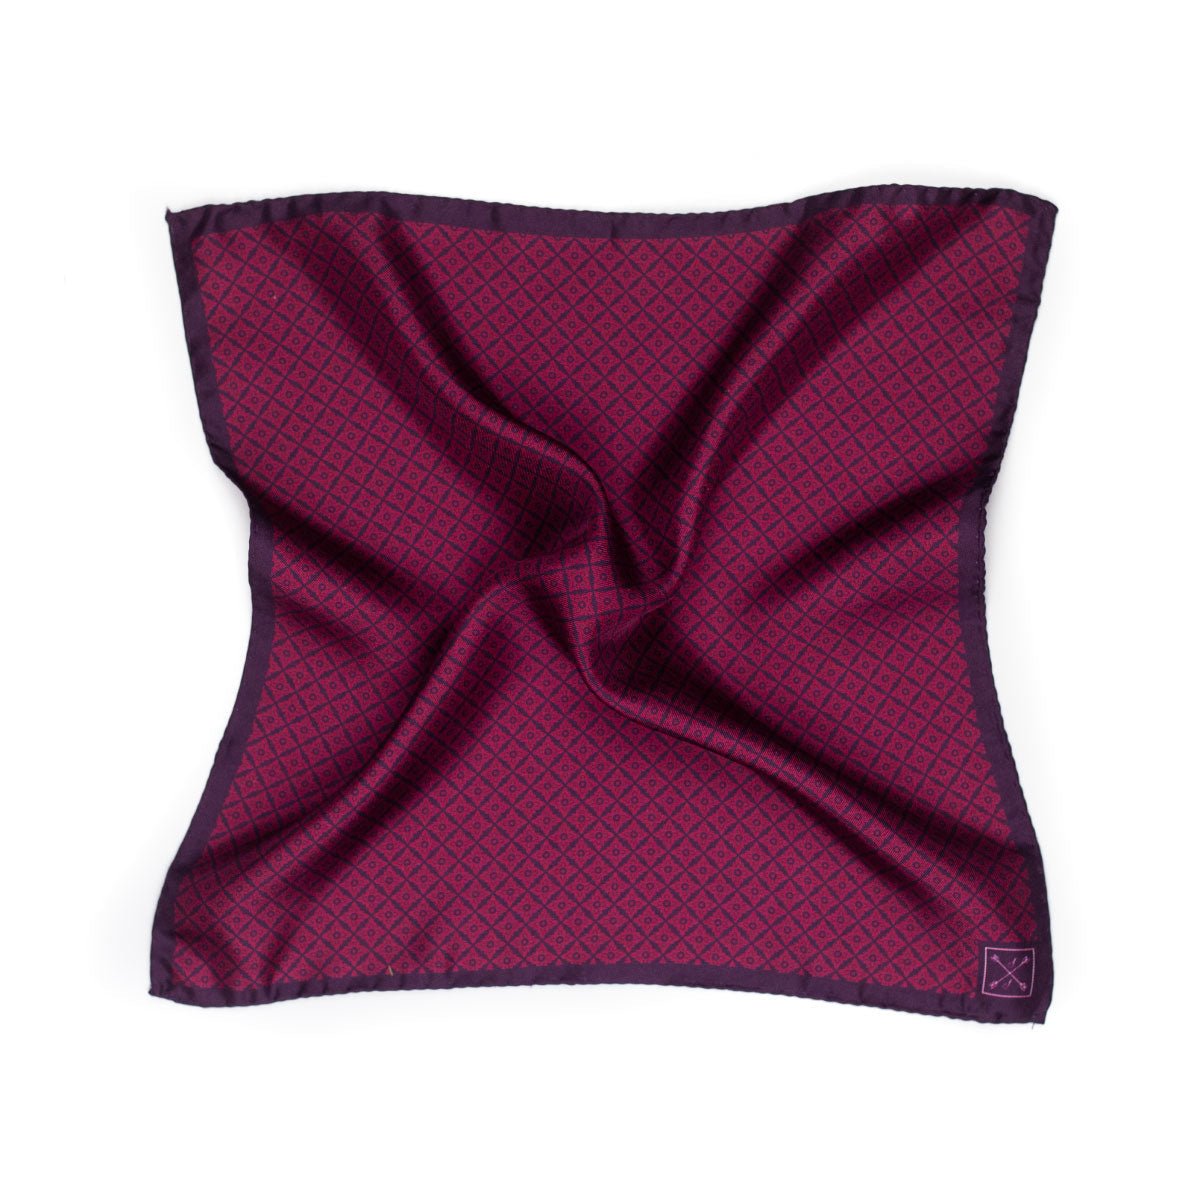 Burgundy and Red Floral Pocket Square